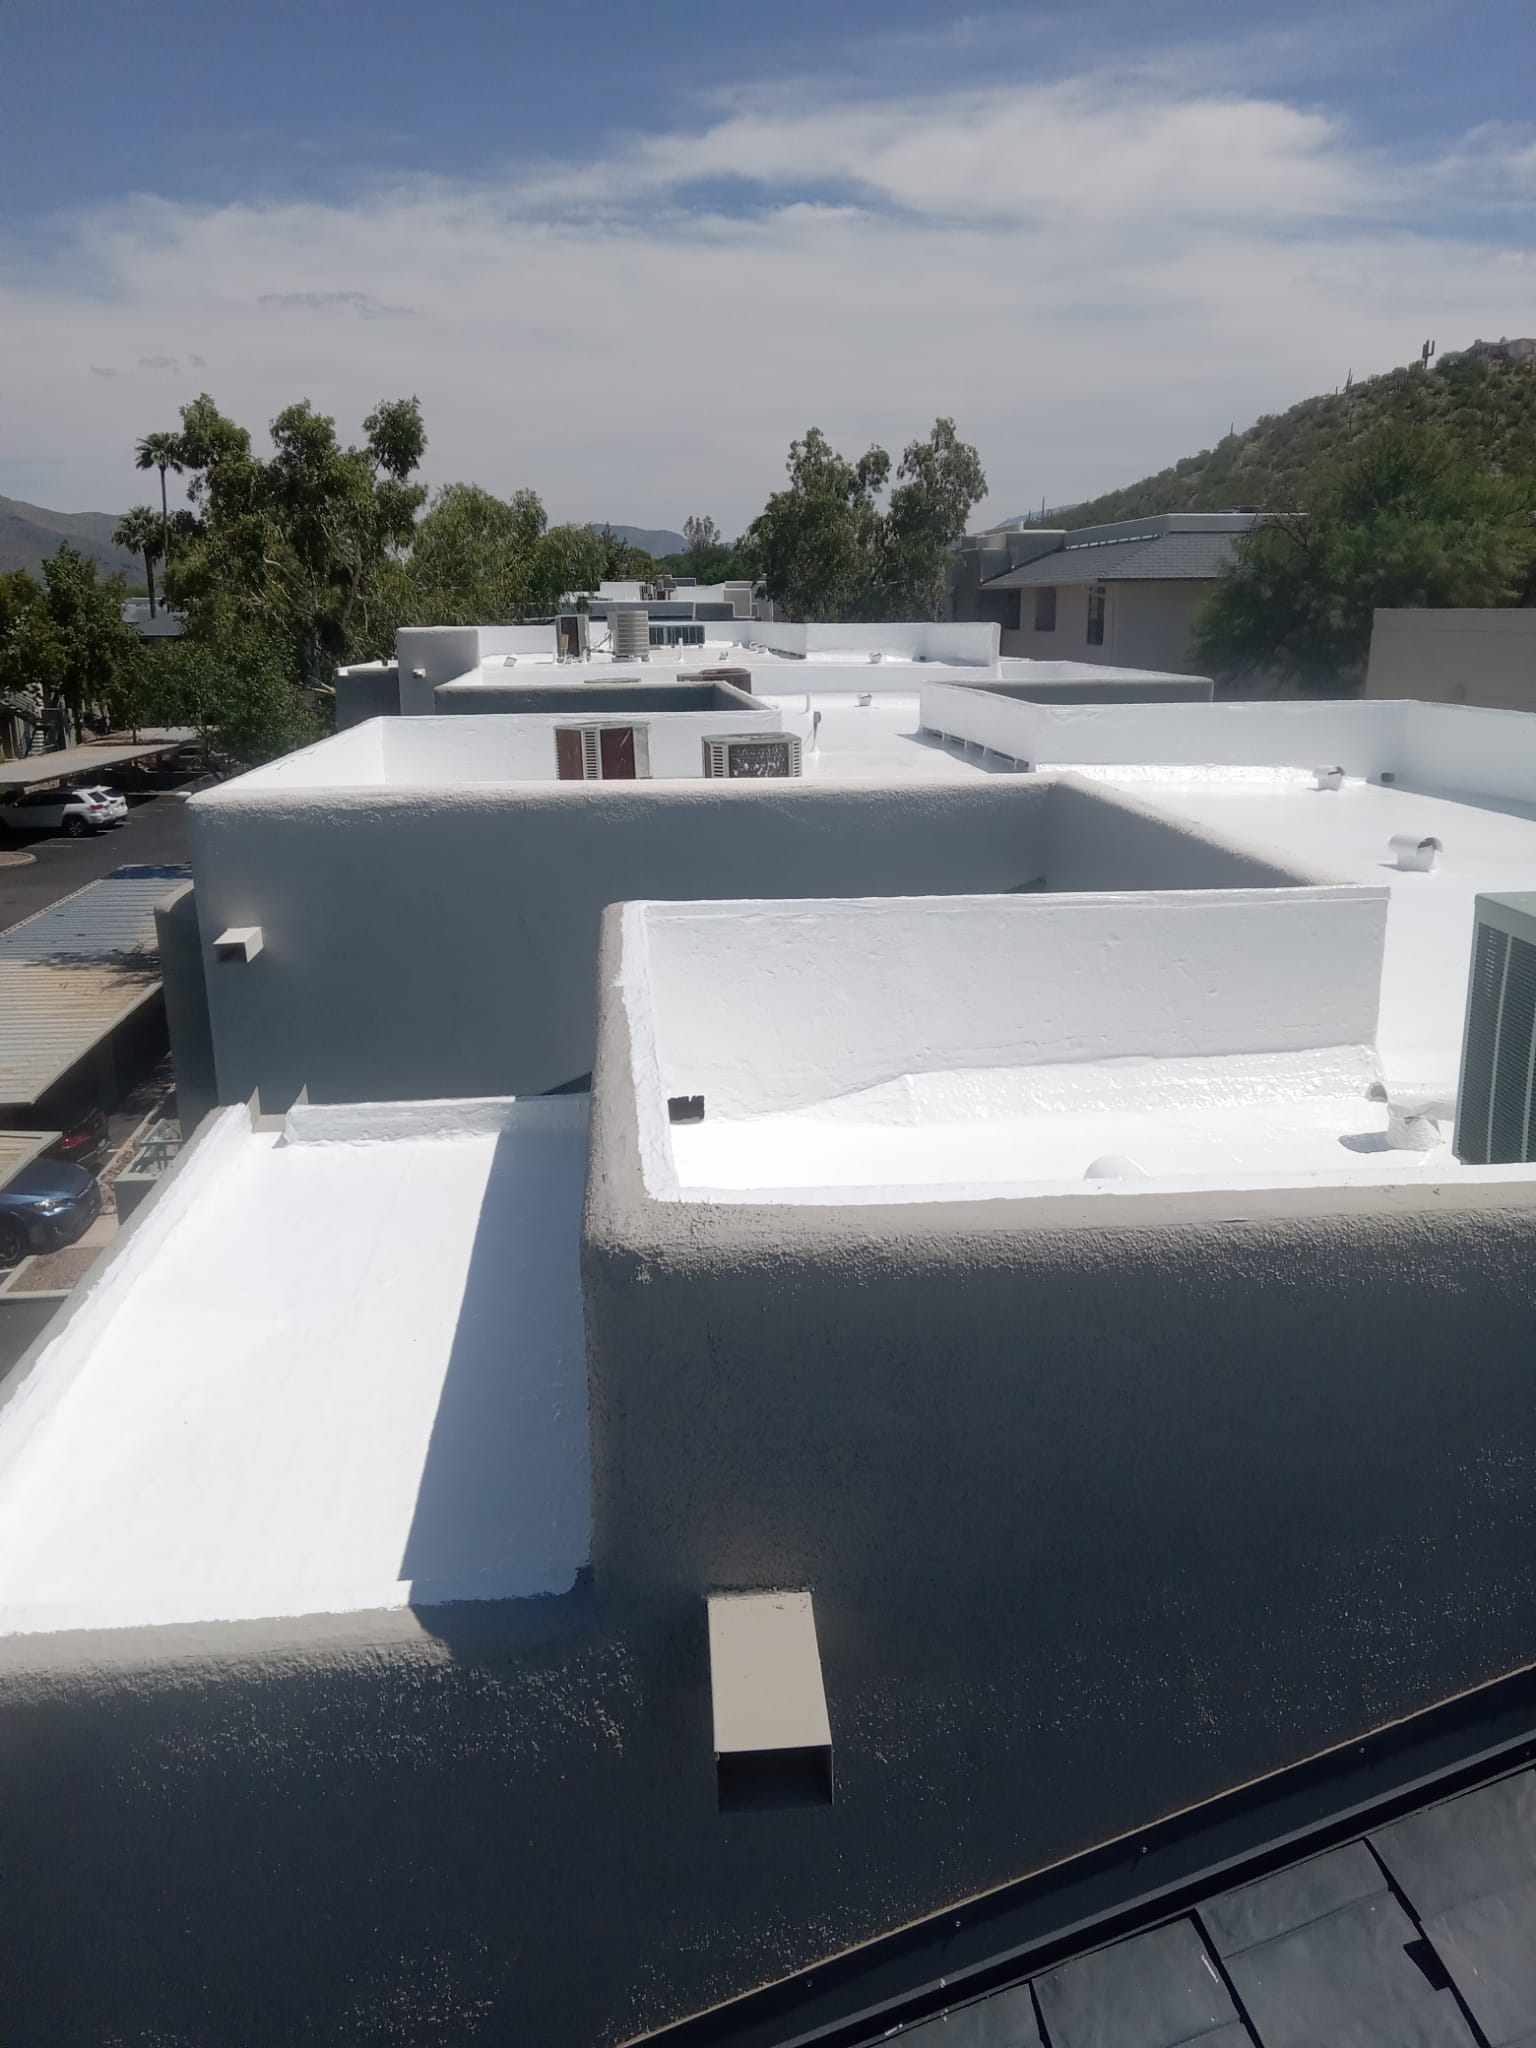 High-angle view of a Biltmore area residential complex, with rooftops neatly insulated with spray foam.